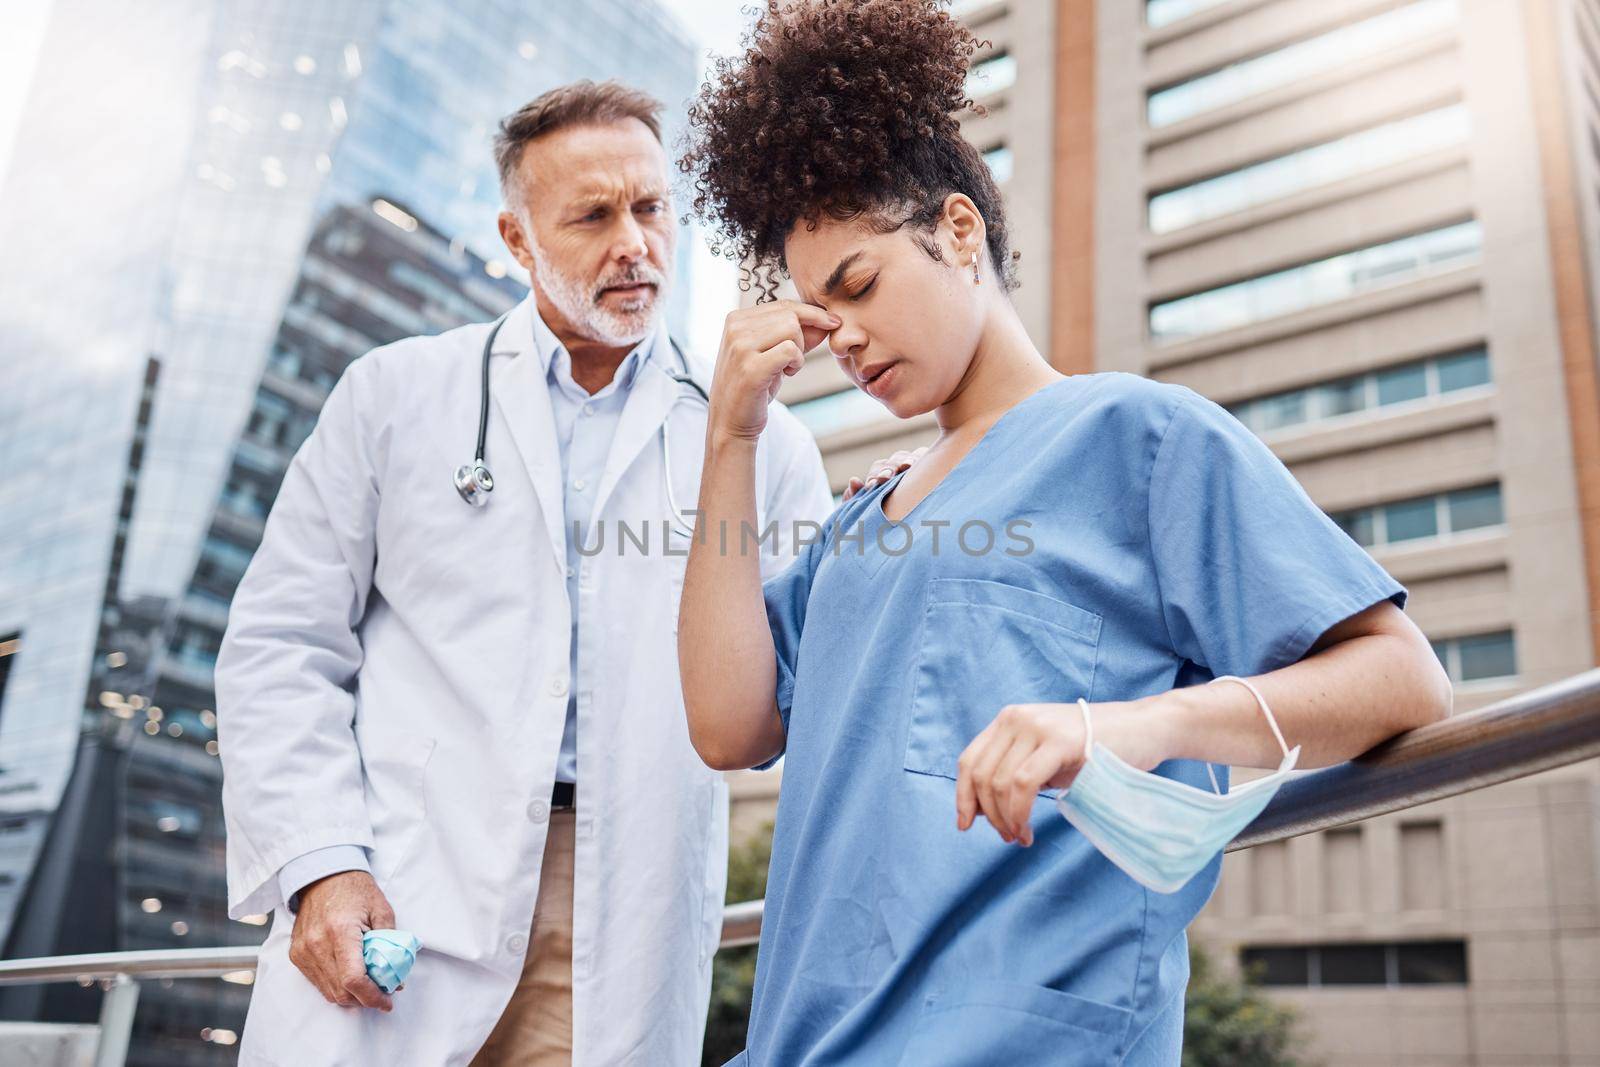 Shot of a young female nurse suffering from a headache while talking to a colleague in the city.